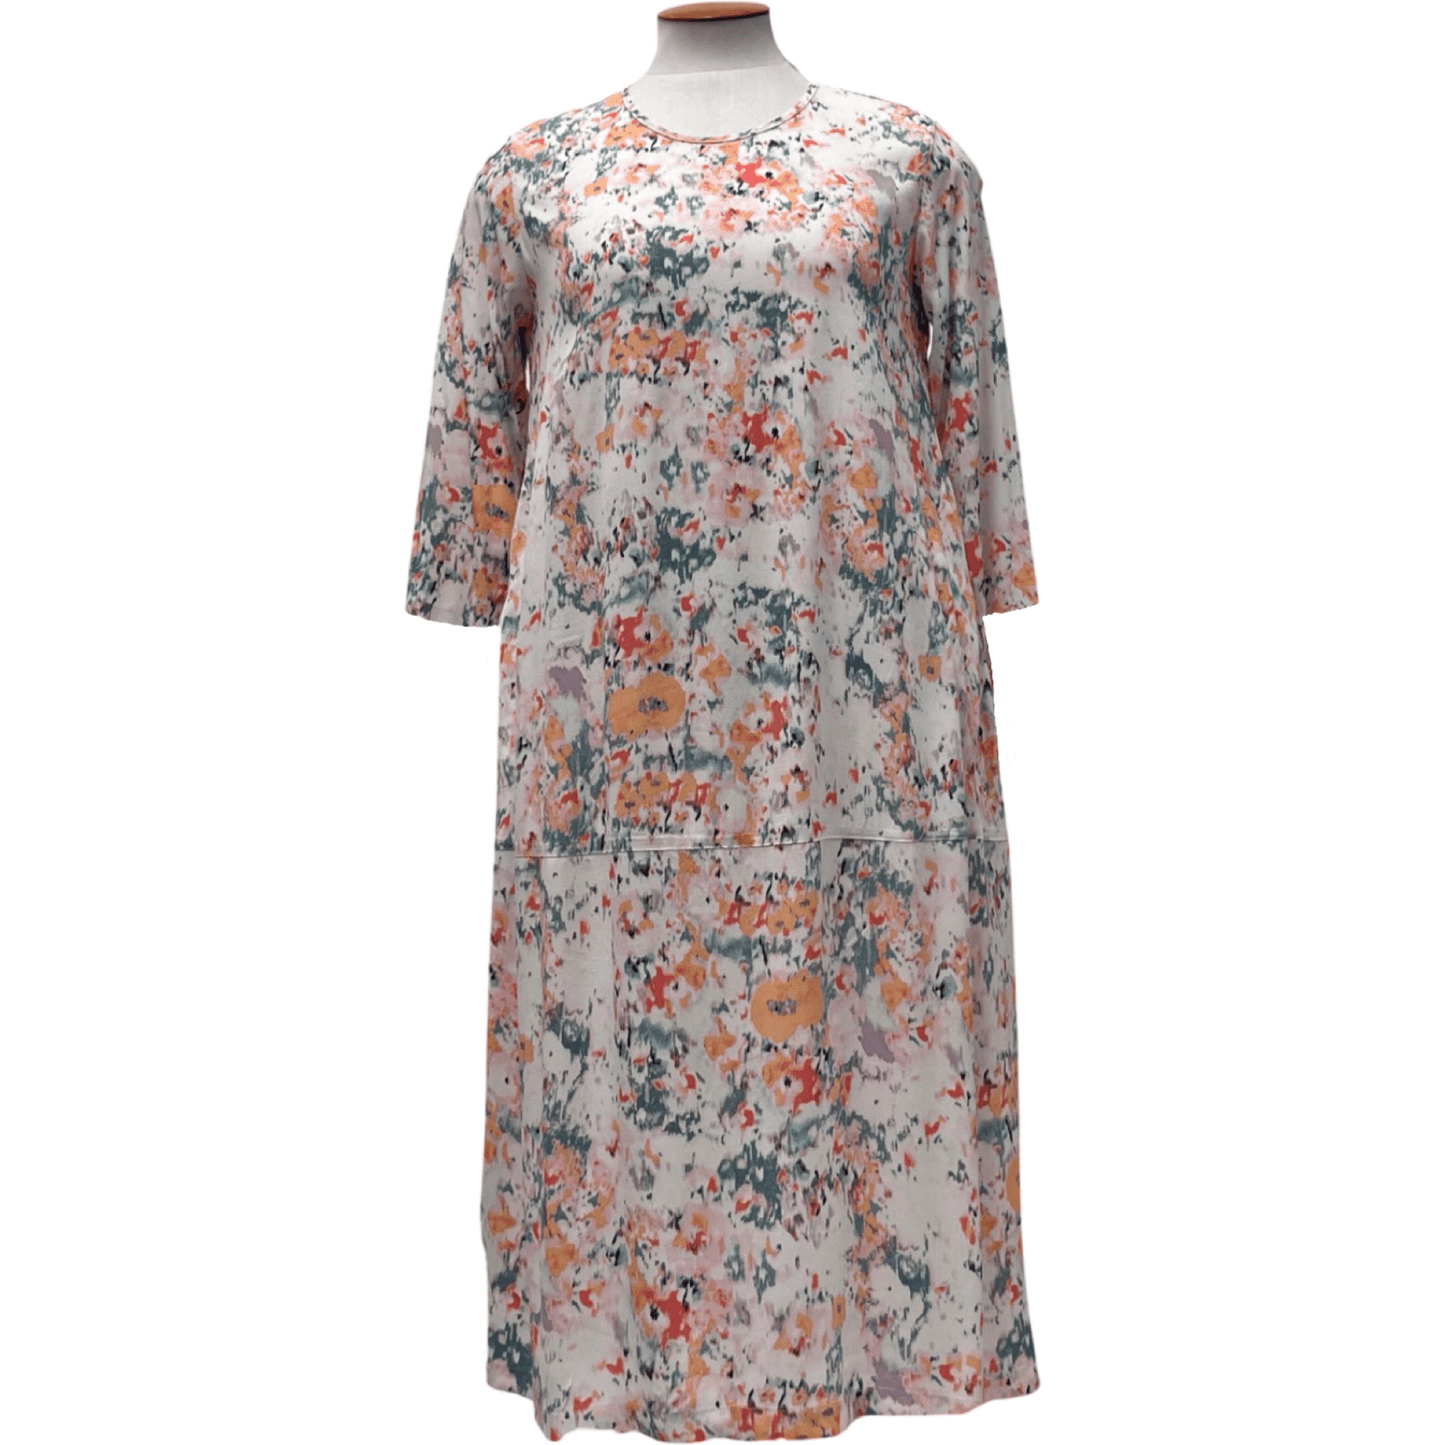 Bloom Clothing NZ,LIFE IN A BUBBLE DRESS - Pastel Floral,$279.00,